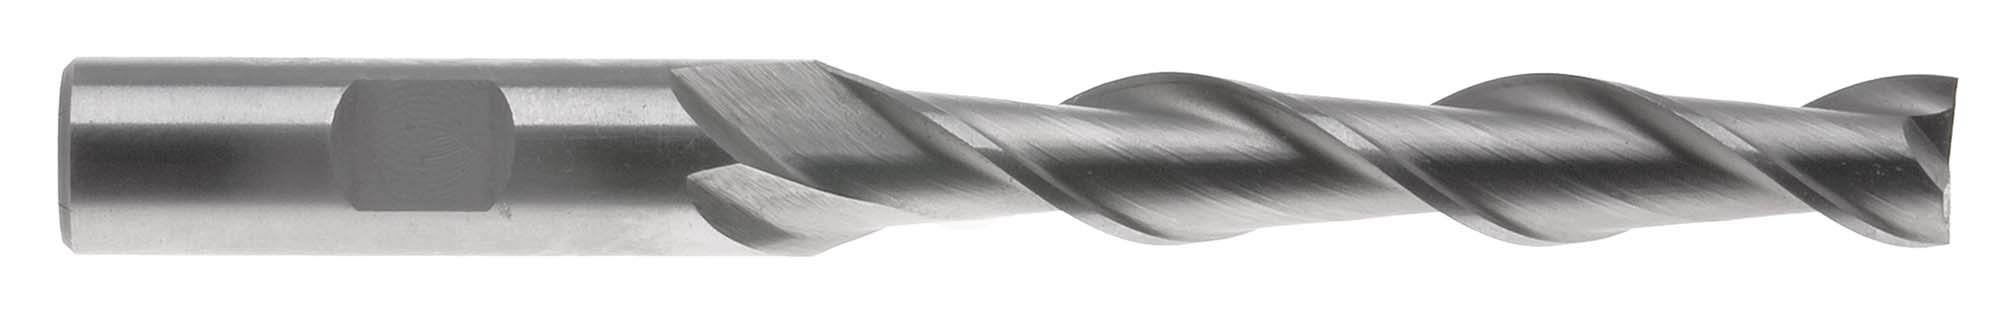 EM-AL32B  1" Extra Long Aluminum Cutting 2 Flute End Mill with High Helix Flutes, 1" shank, High Speed Steel